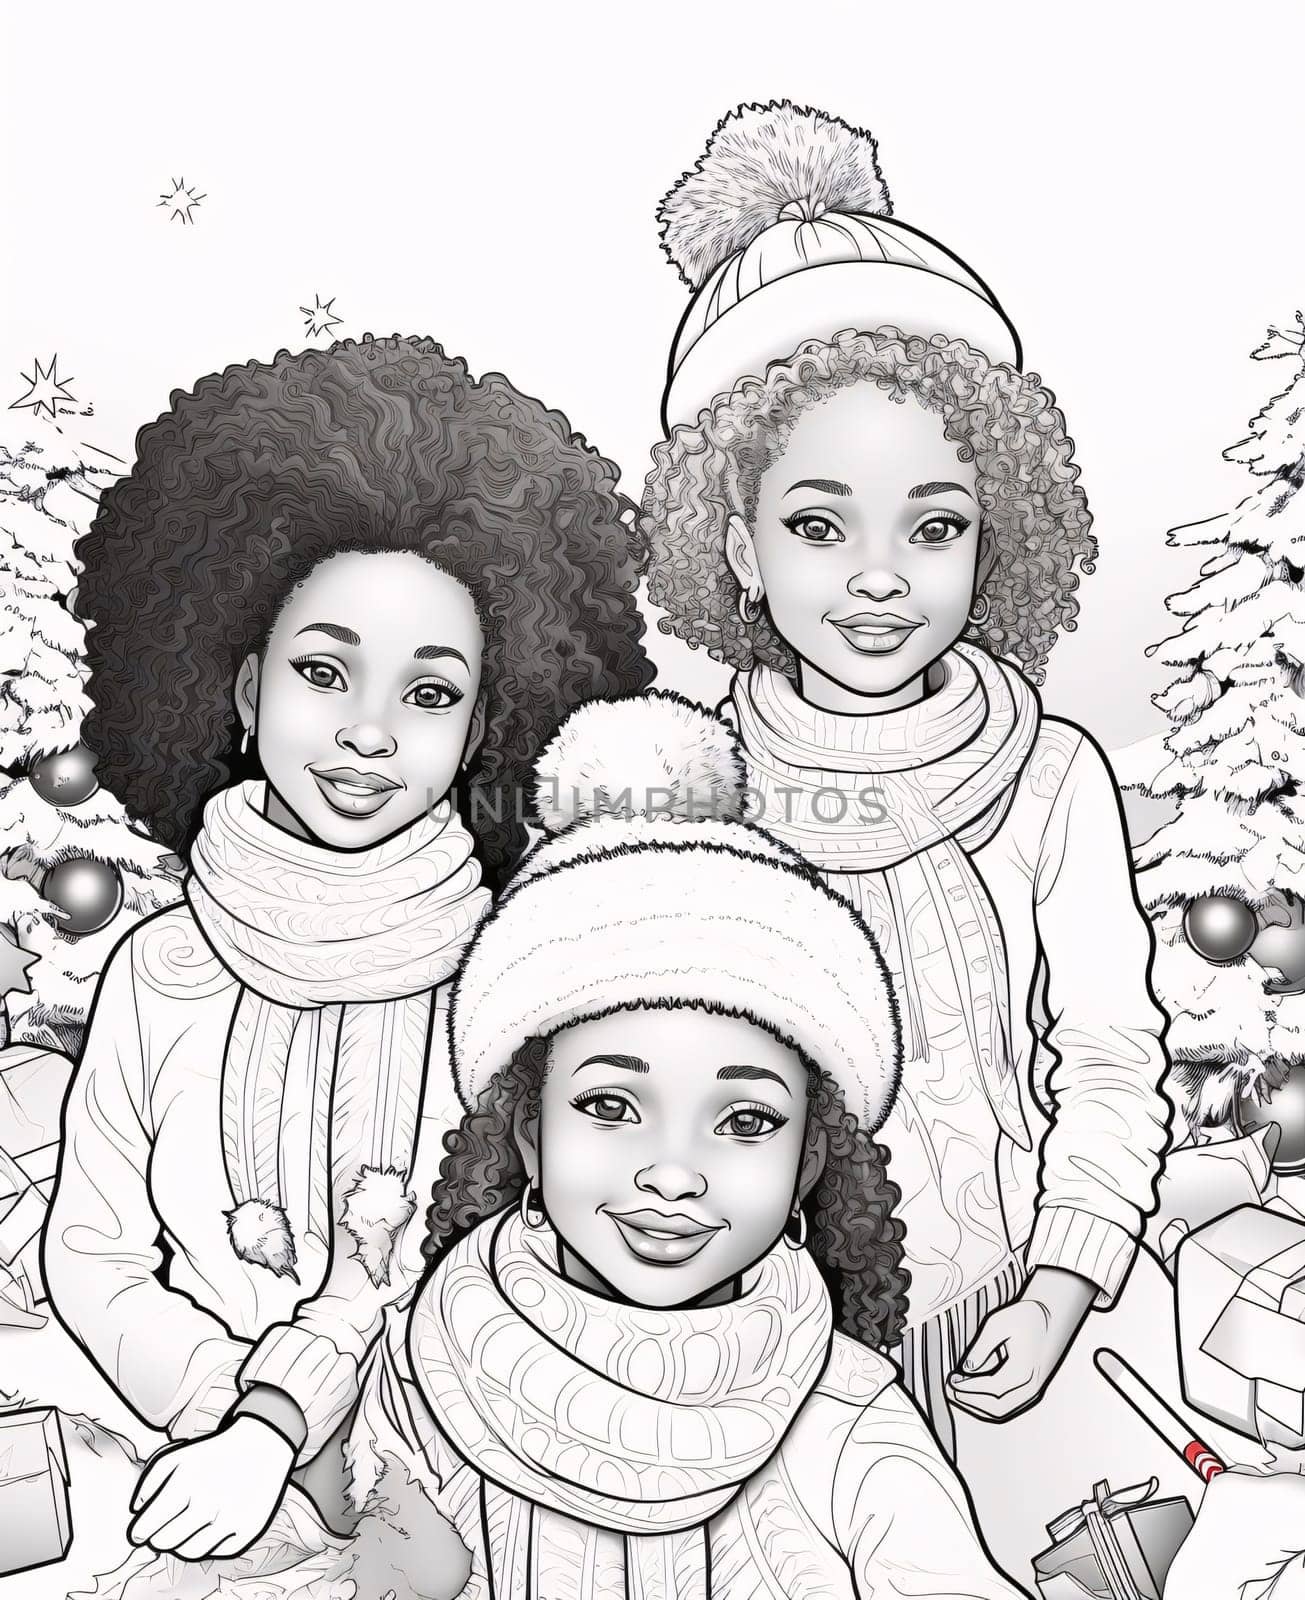 Black and White coloring page, black family wearing hats and scarves. Celebrating Black History Month! by ThemesS